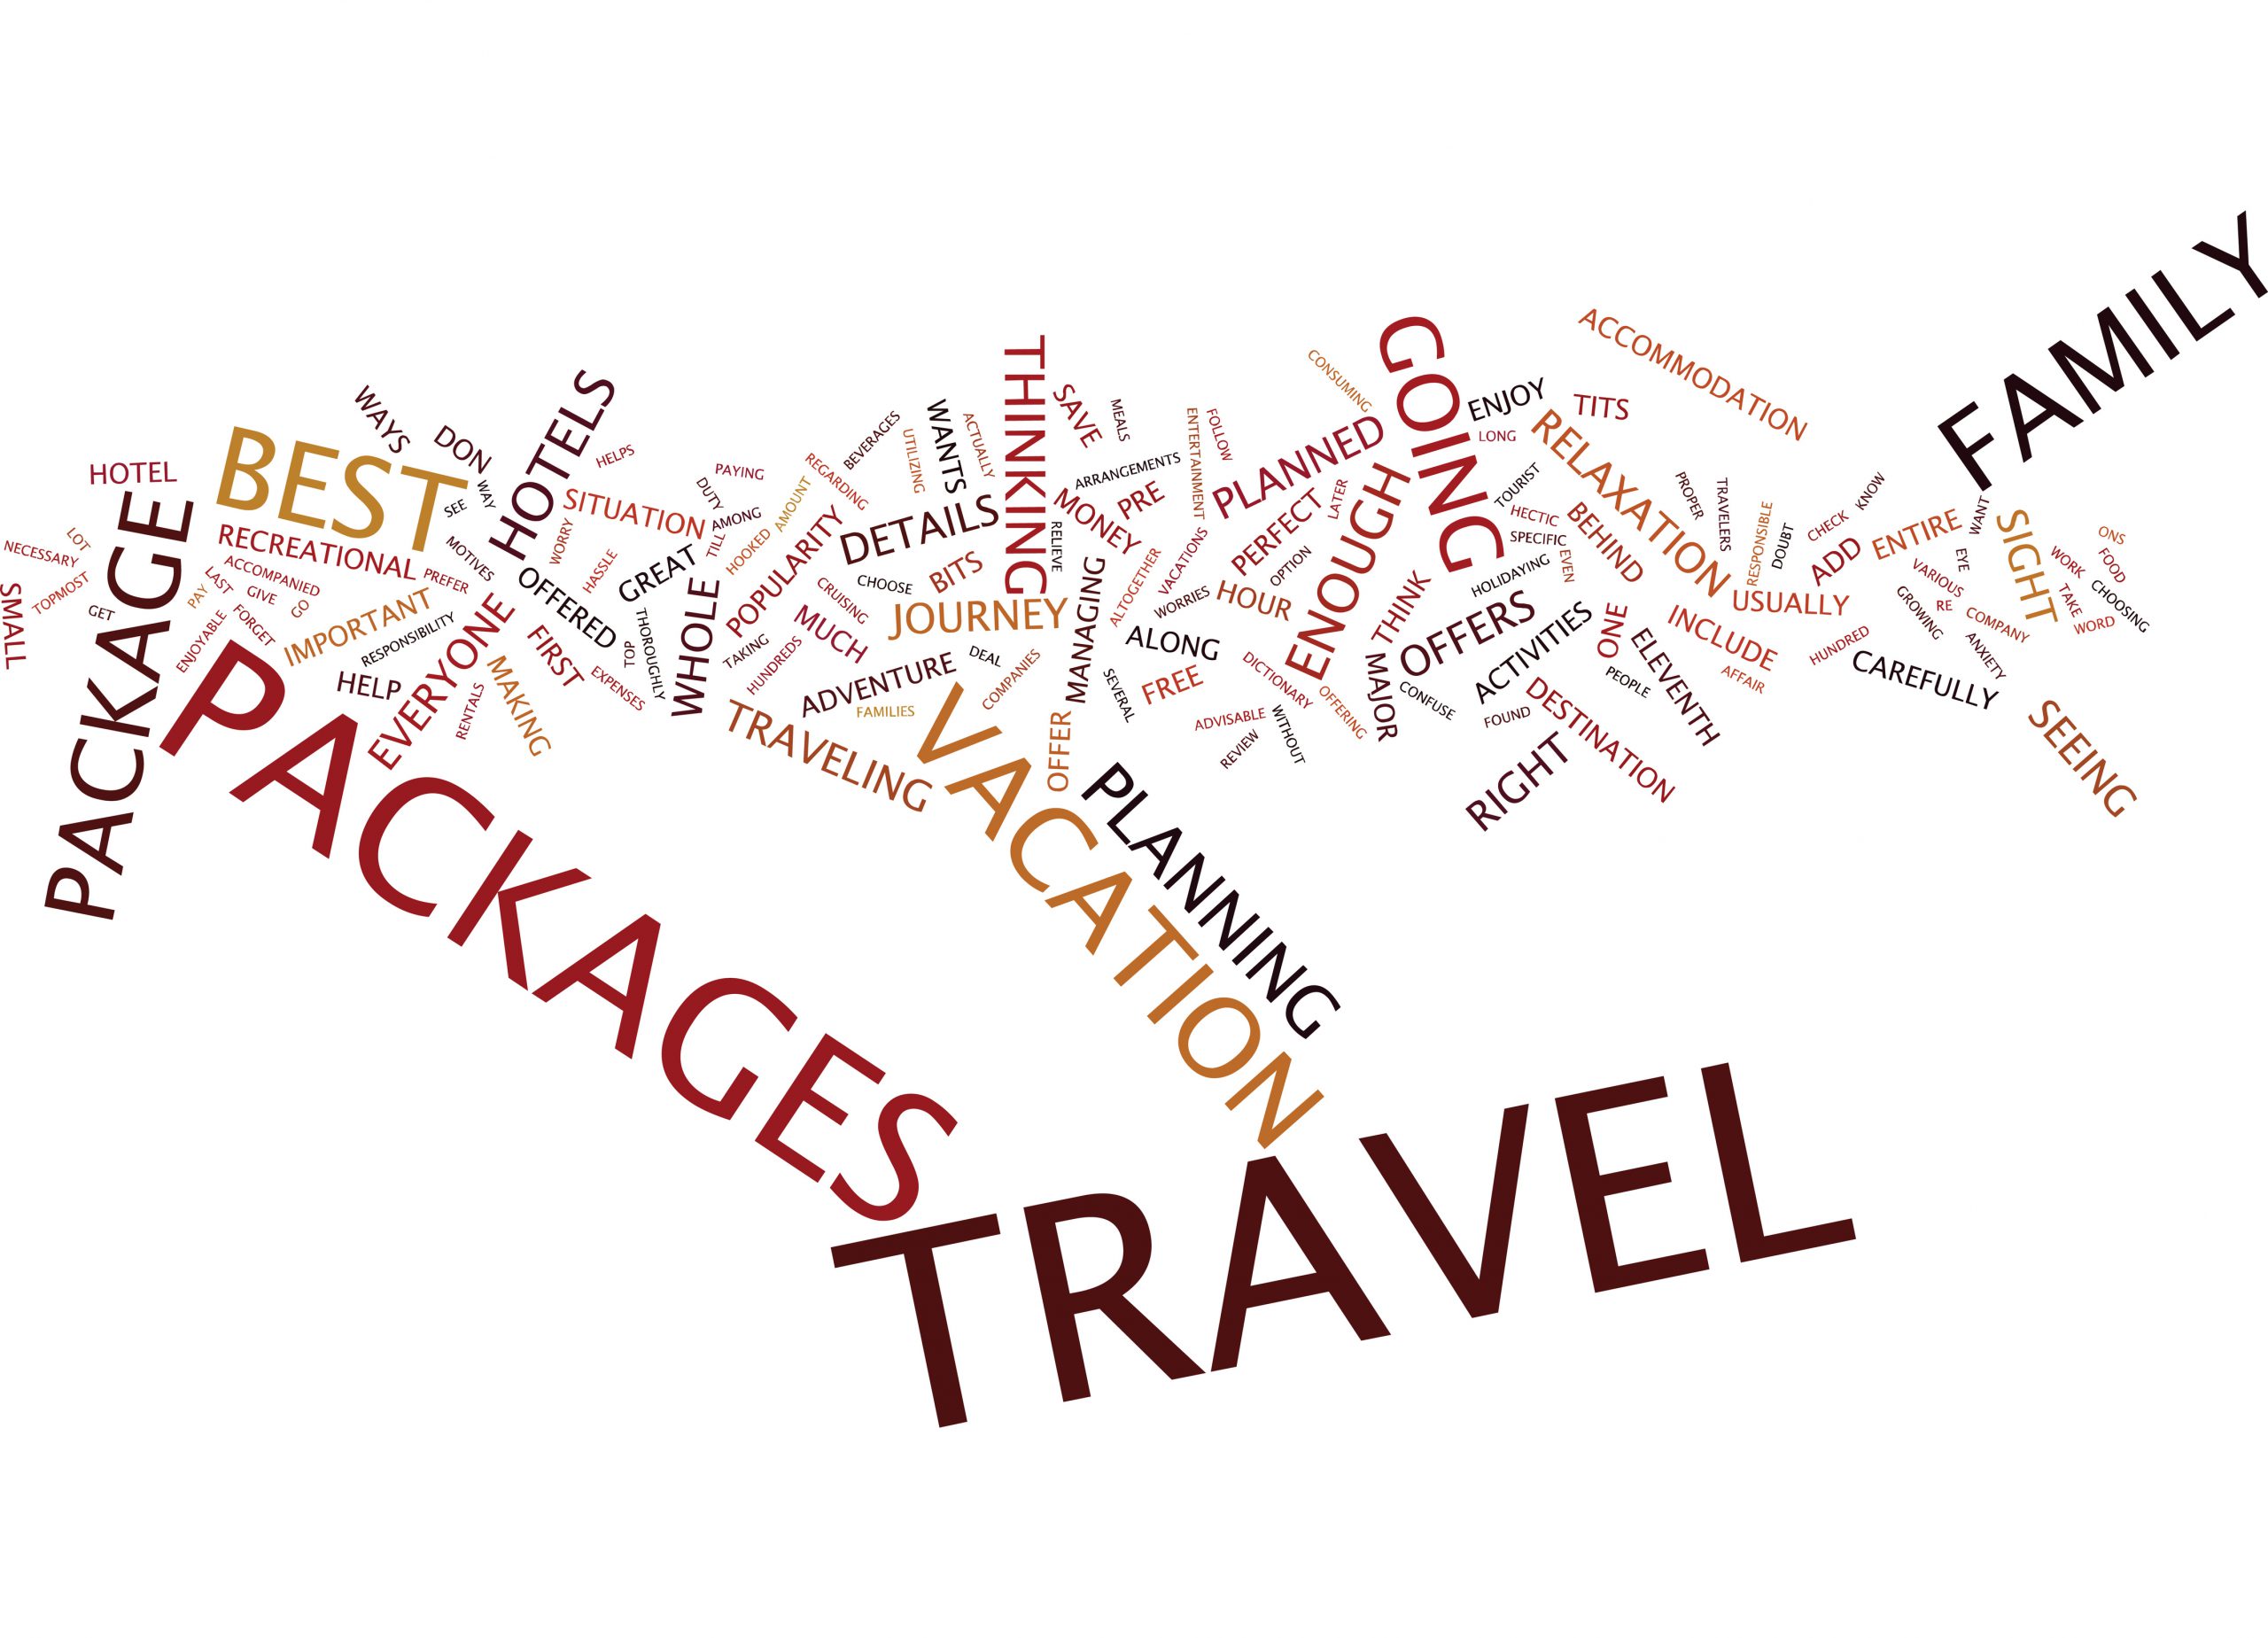 Package holiday makers [What Europe does for you]